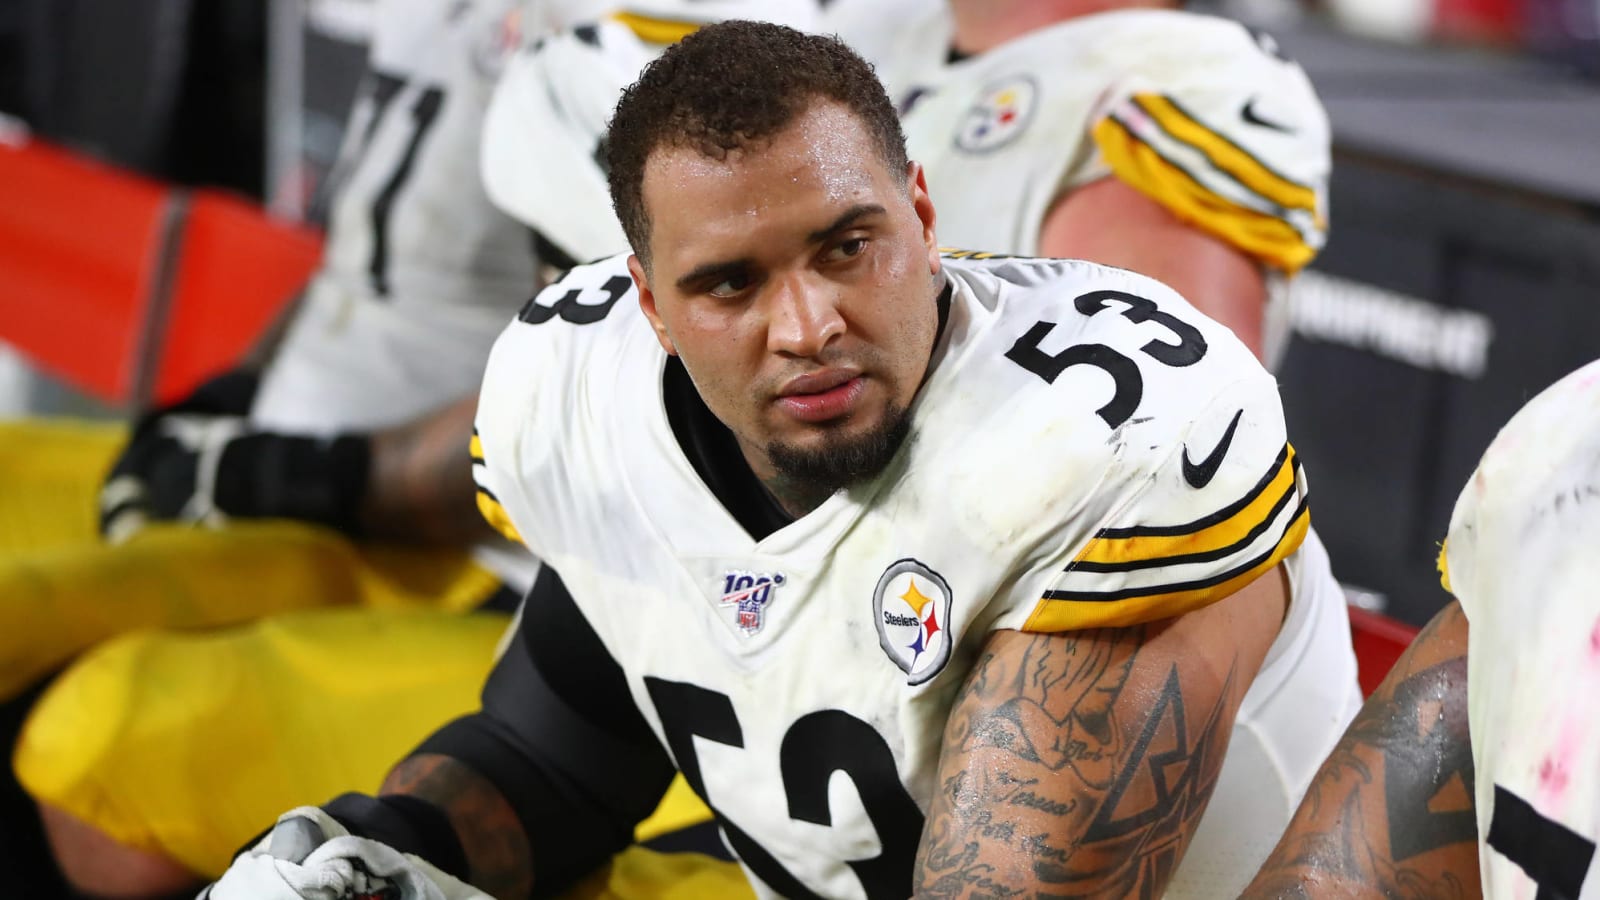 Maurkice Pouncey to announce retirement after 11 seasons